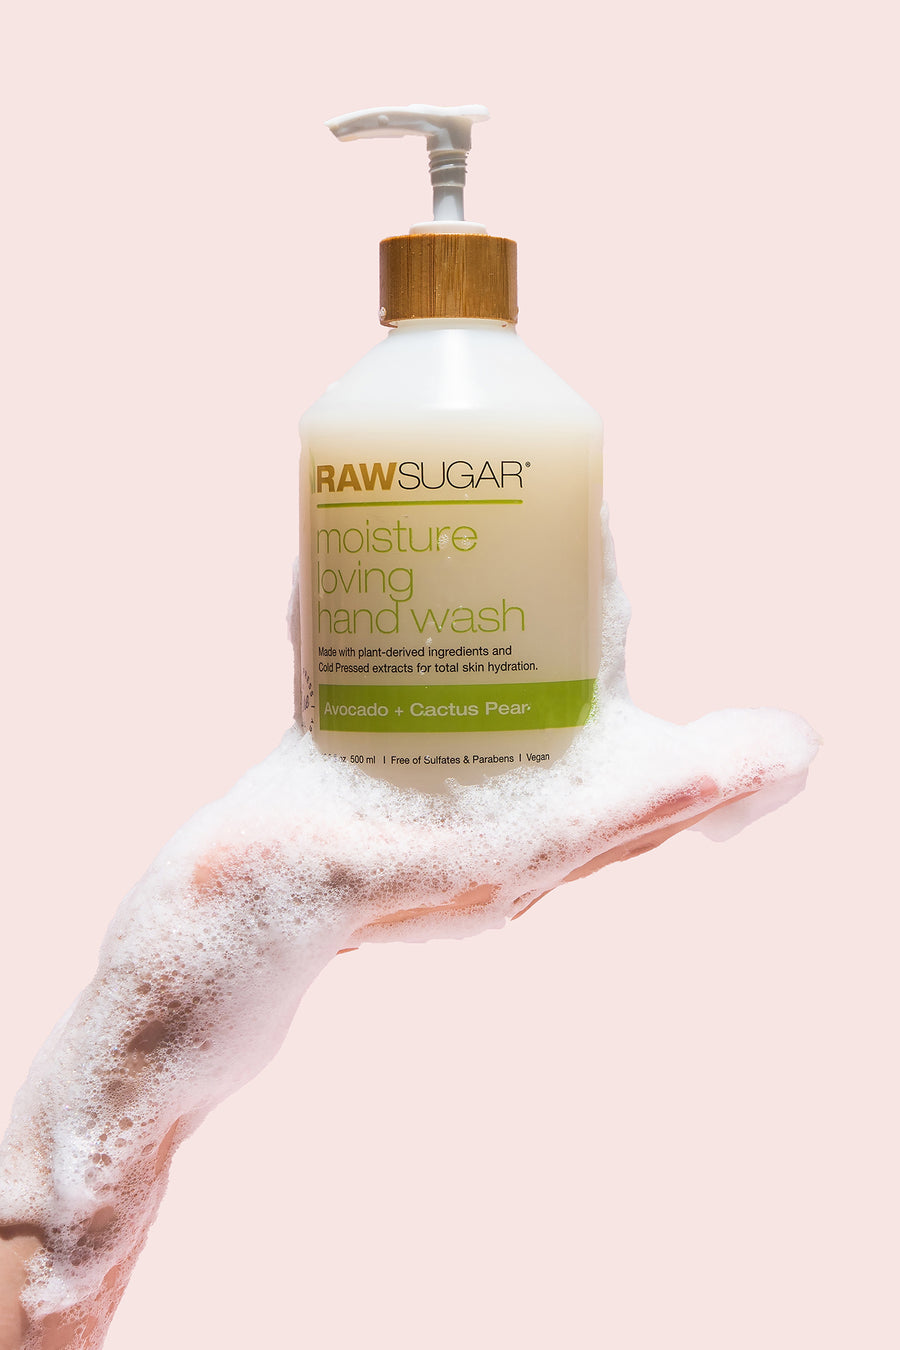 A sudsy and white lathered hand holding a Raw Sugar Moisture Loving Hand Wash bottle of Avocado + Cactus Pear 